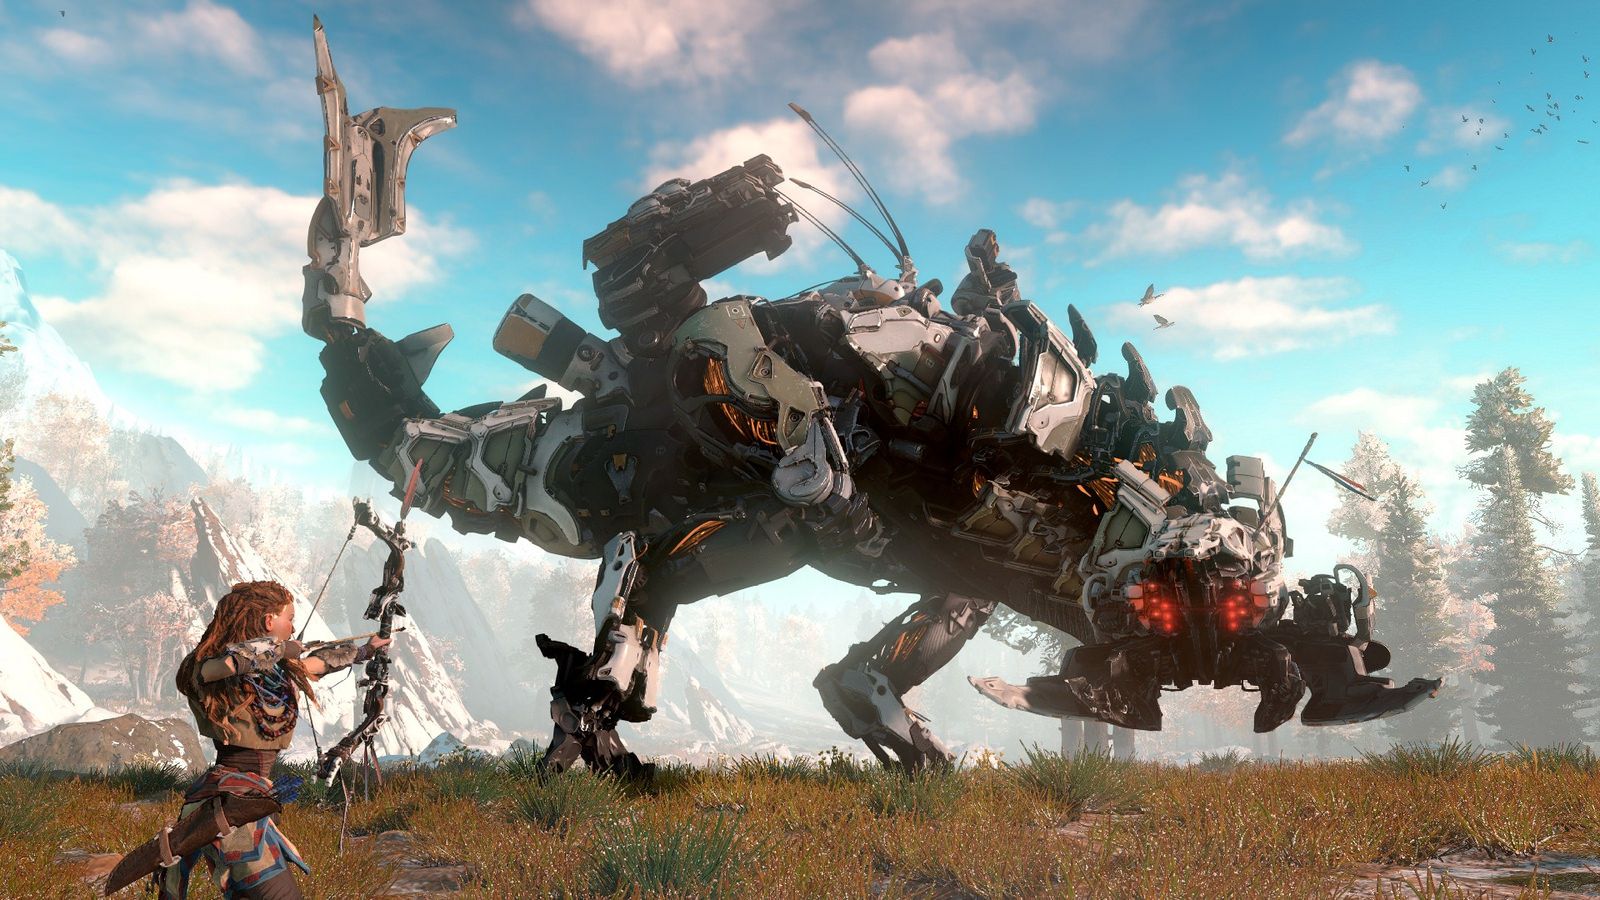 horizon zero dawn is like terminator meets jurassic park another surprise ps4 exclusive announced at e3 image 1